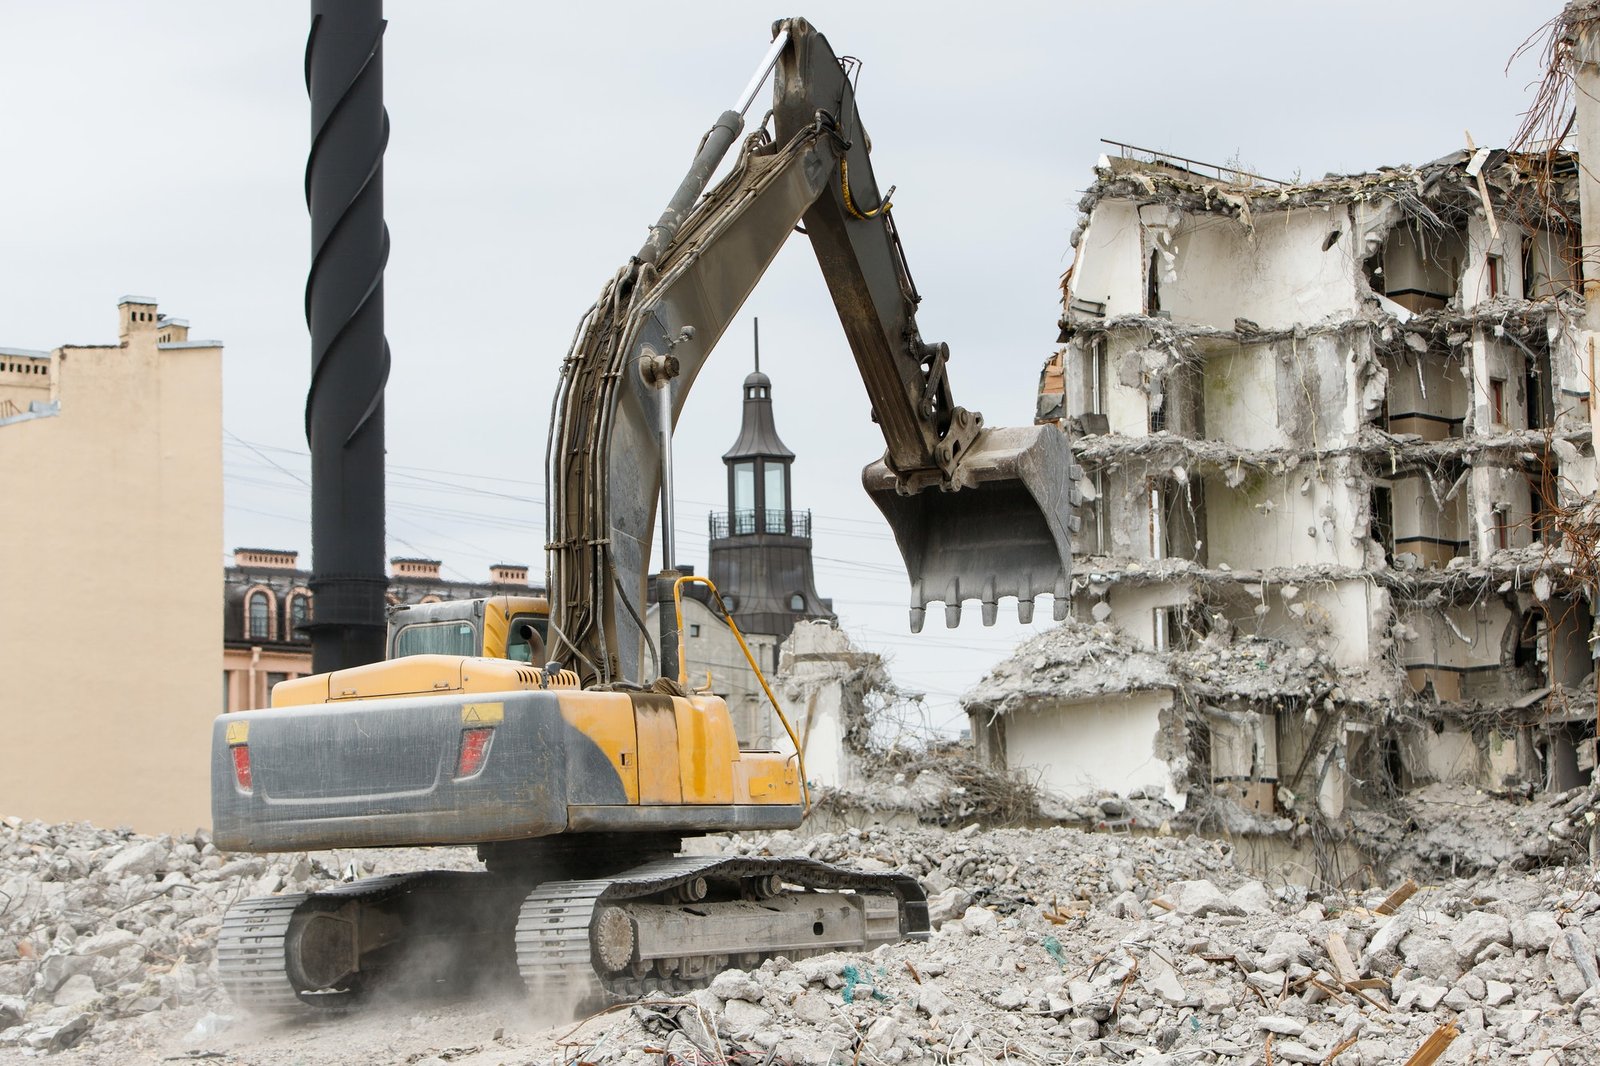 Building of former hotel demolition for new construction using special hydraulic excavator-destroyer